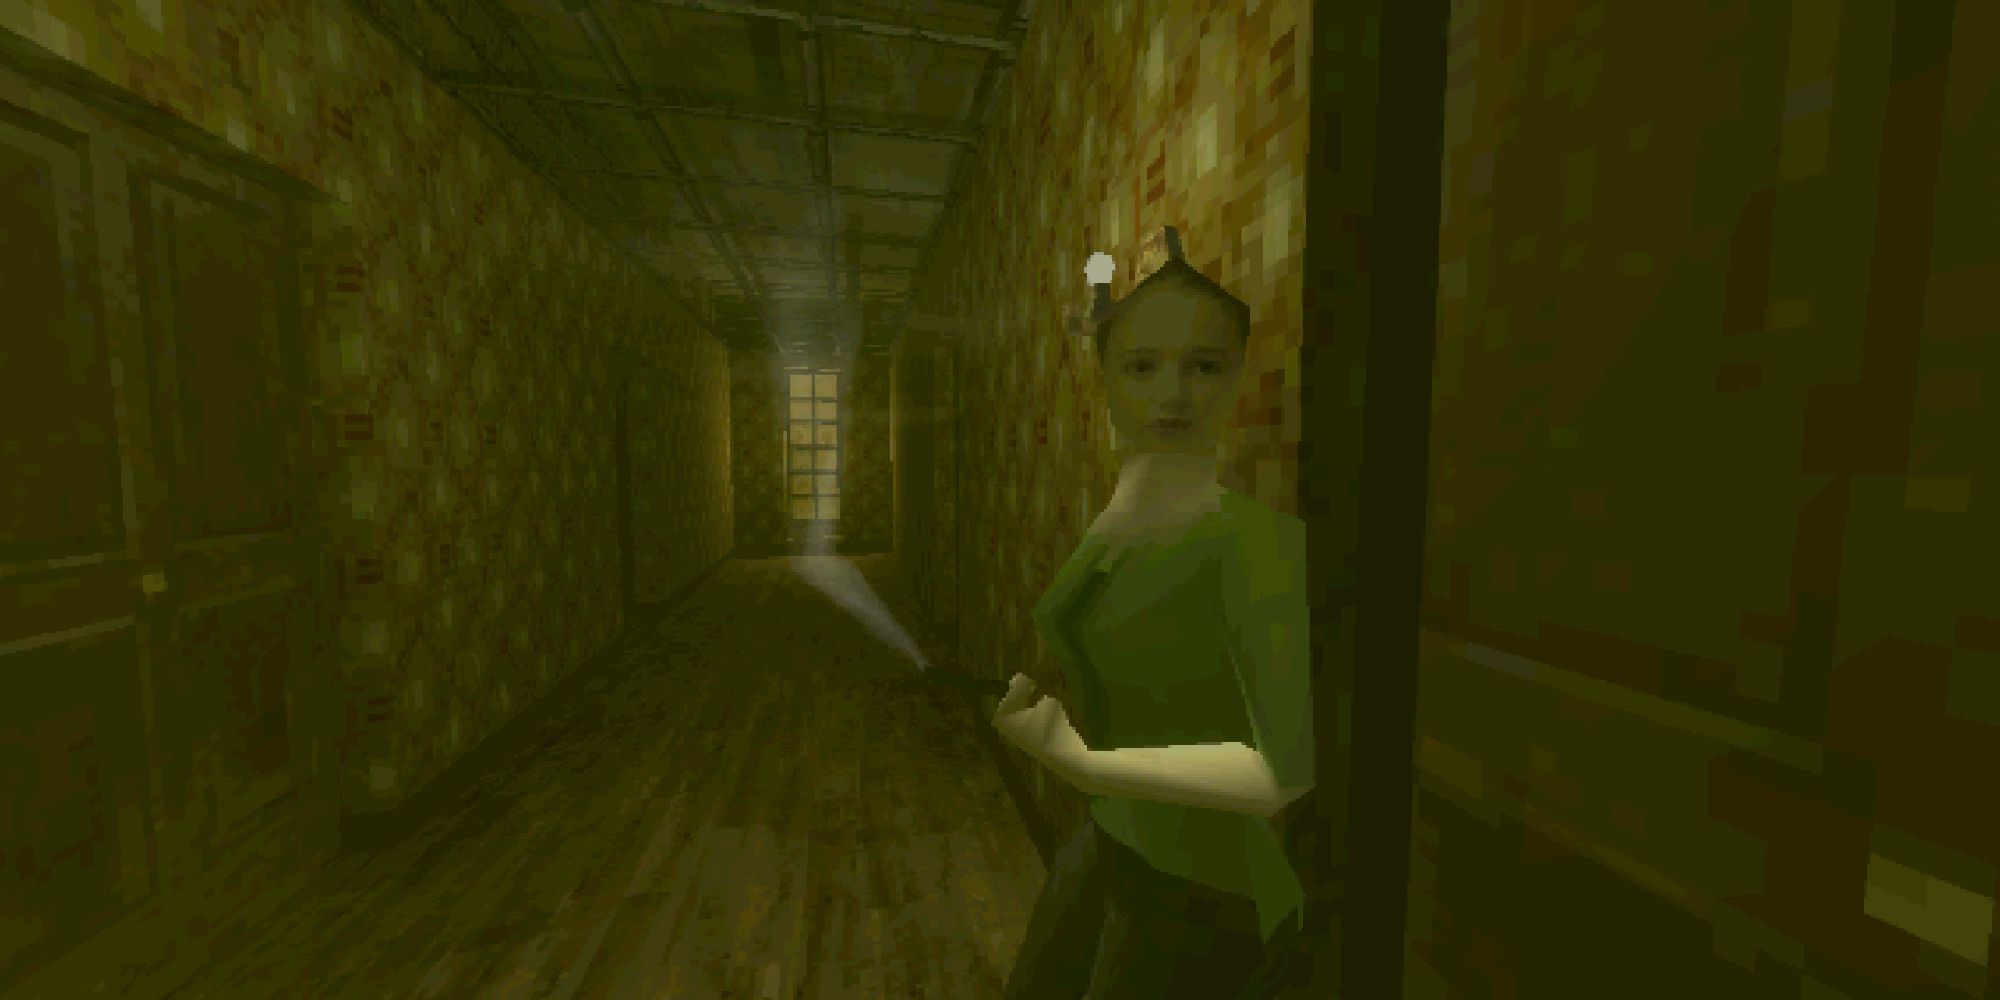 A screenshot of the indie horror game Paratopic.